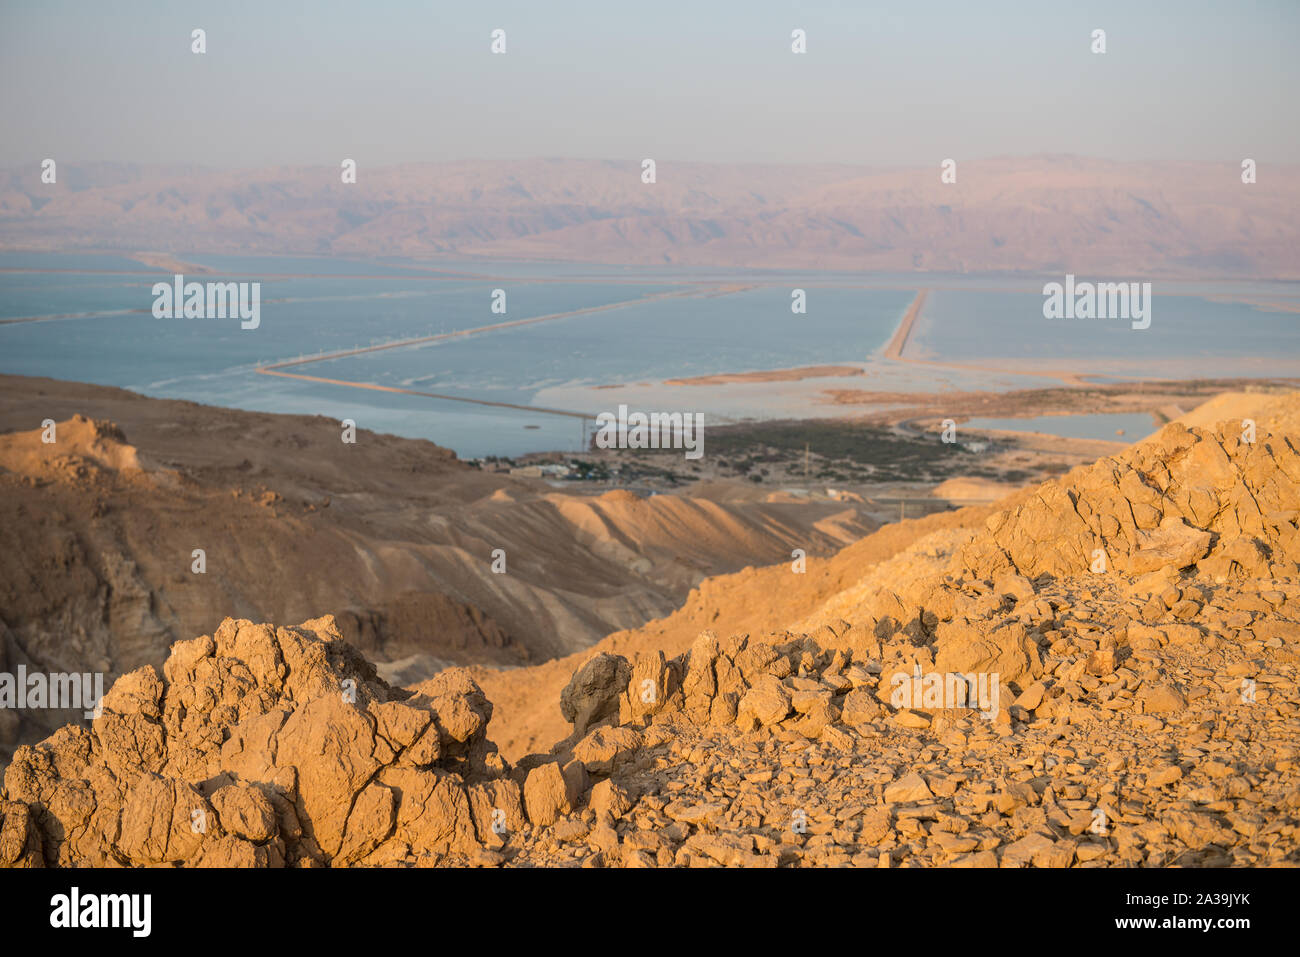 A view of the Dead Sea from mountains on the Israeli shore Stock Photo